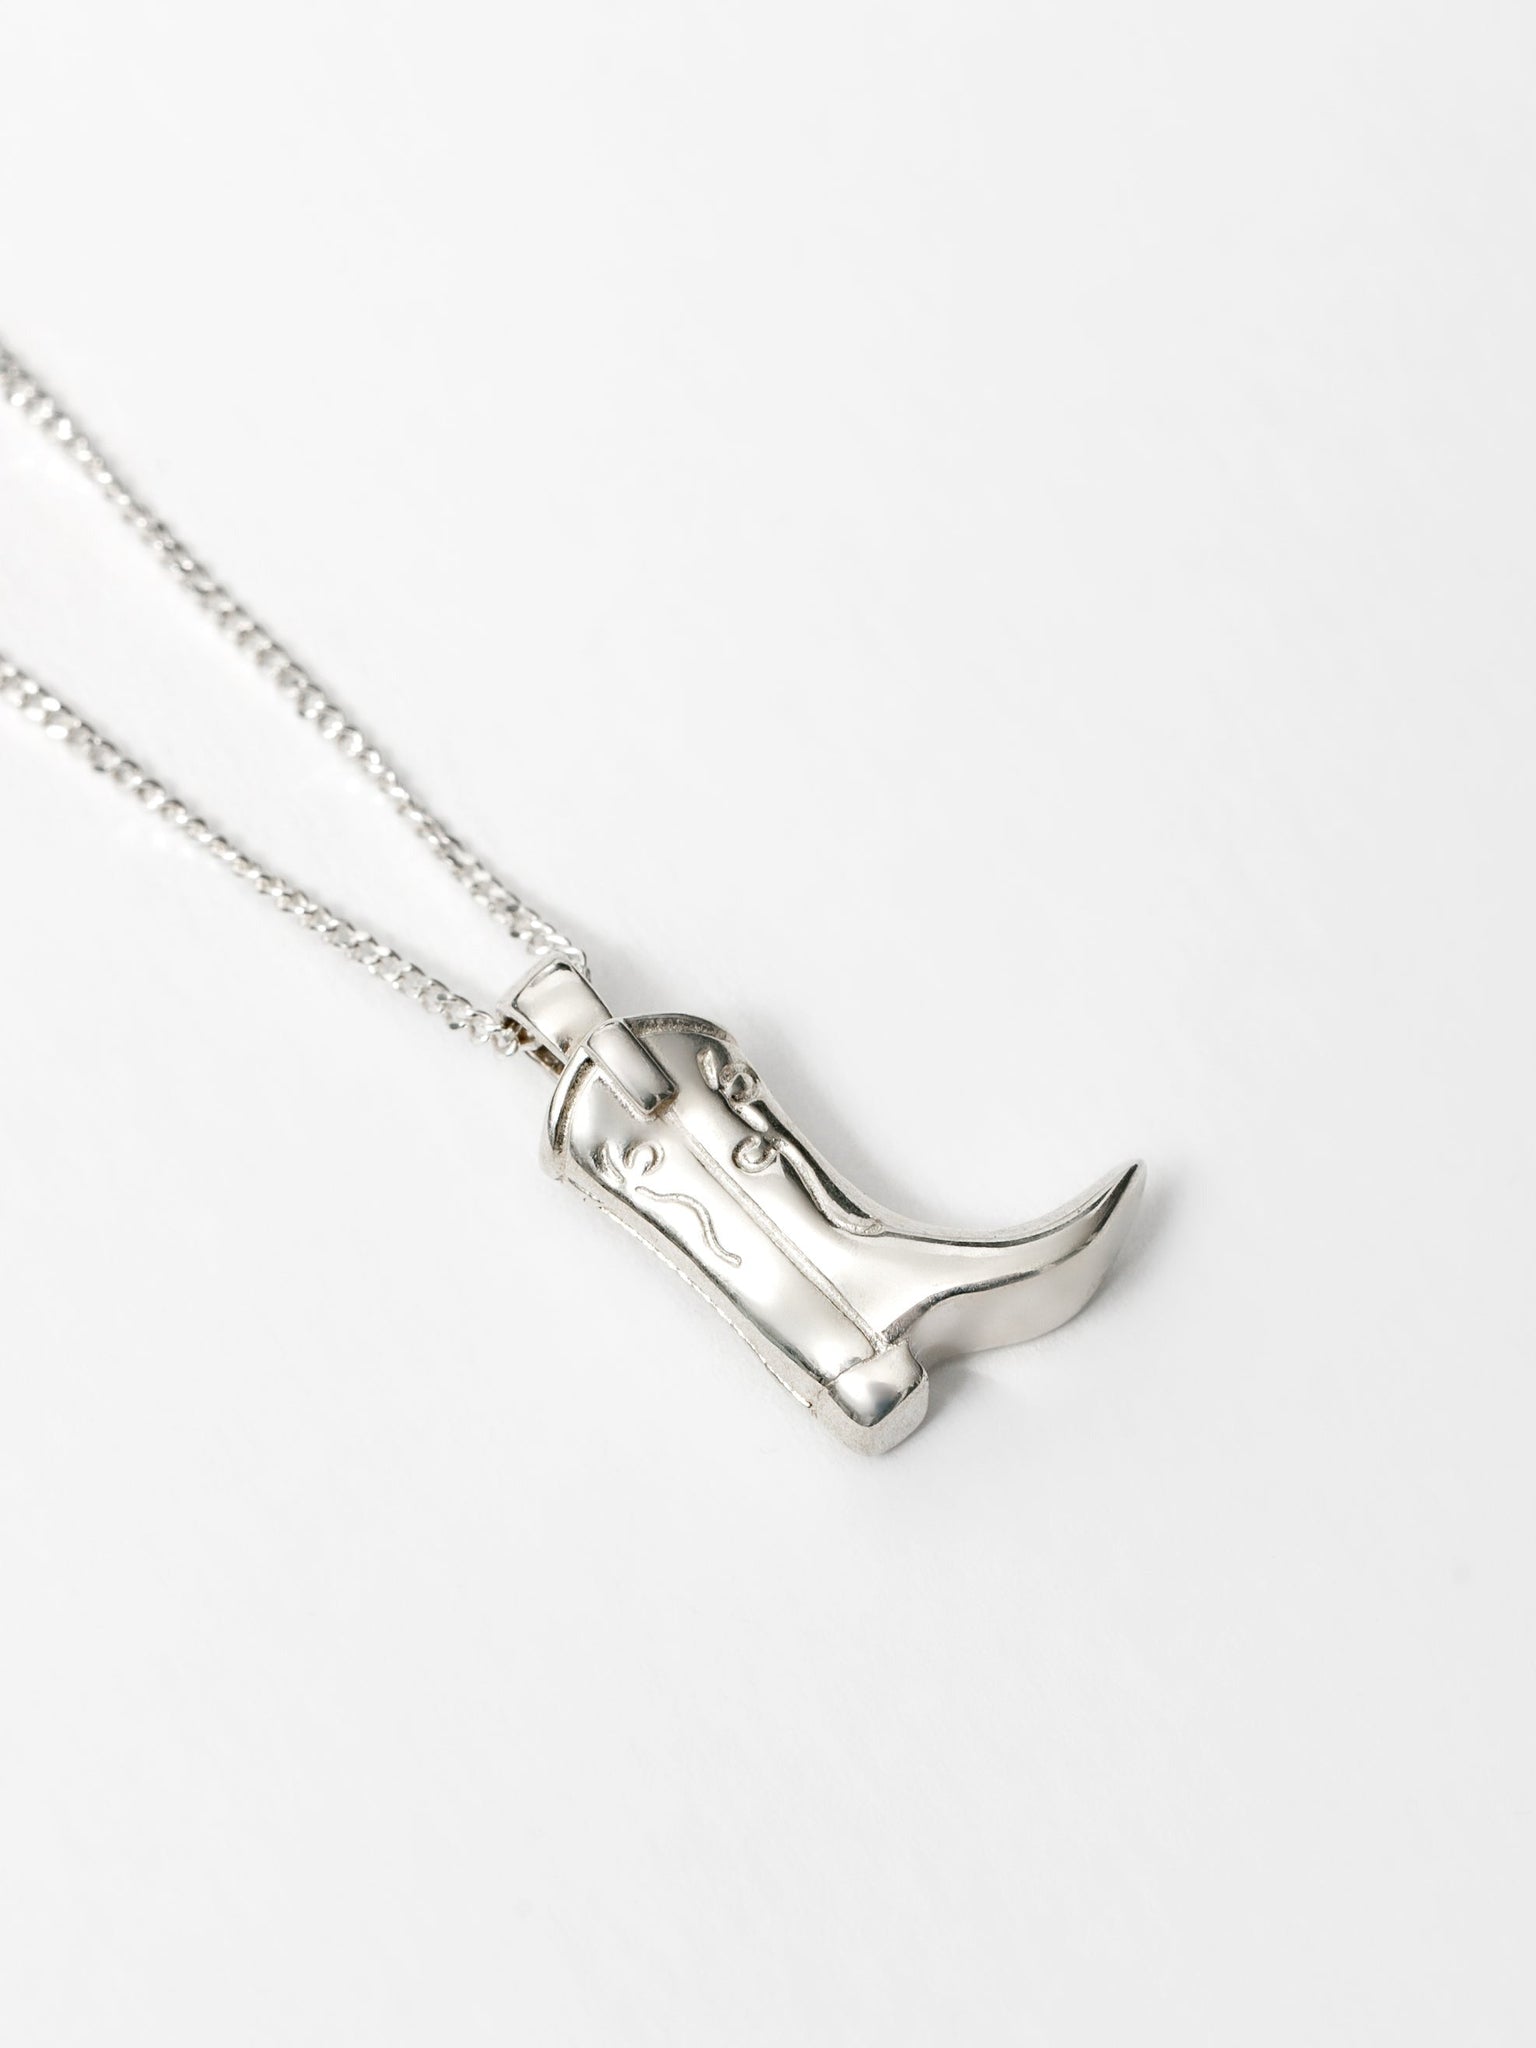 sterling cowboy boot necklace